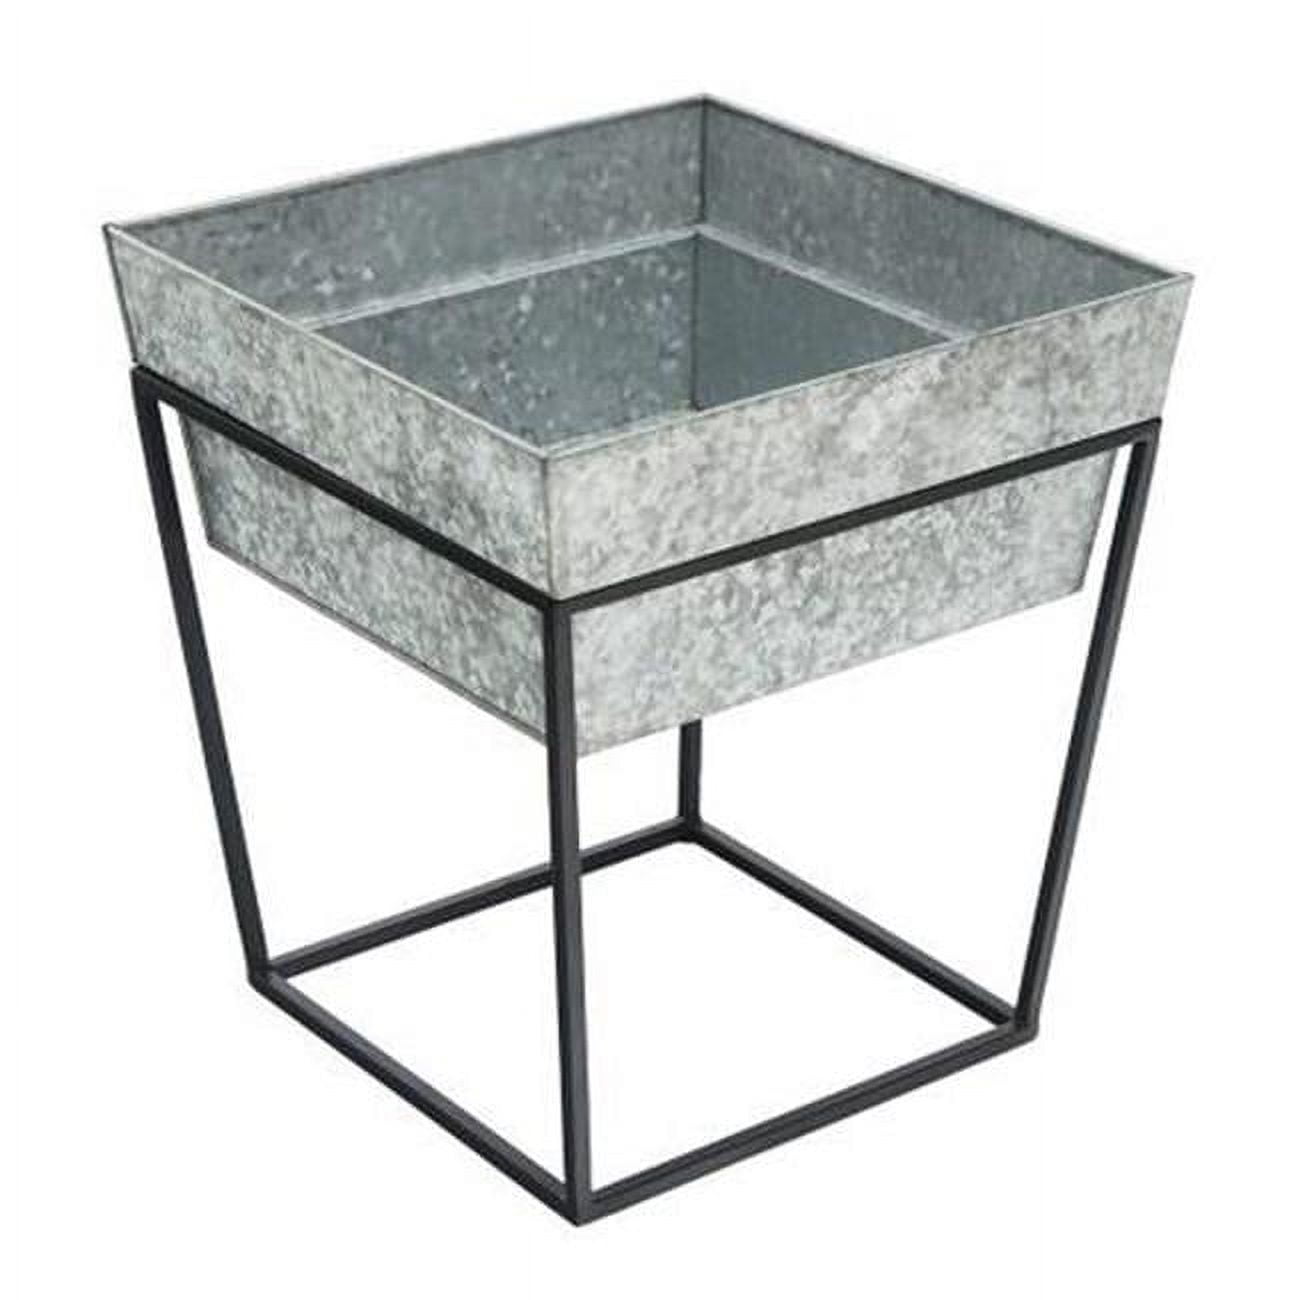 Achla Fb-45g7 Arne Stand With Deep Galvanized Tray, Short